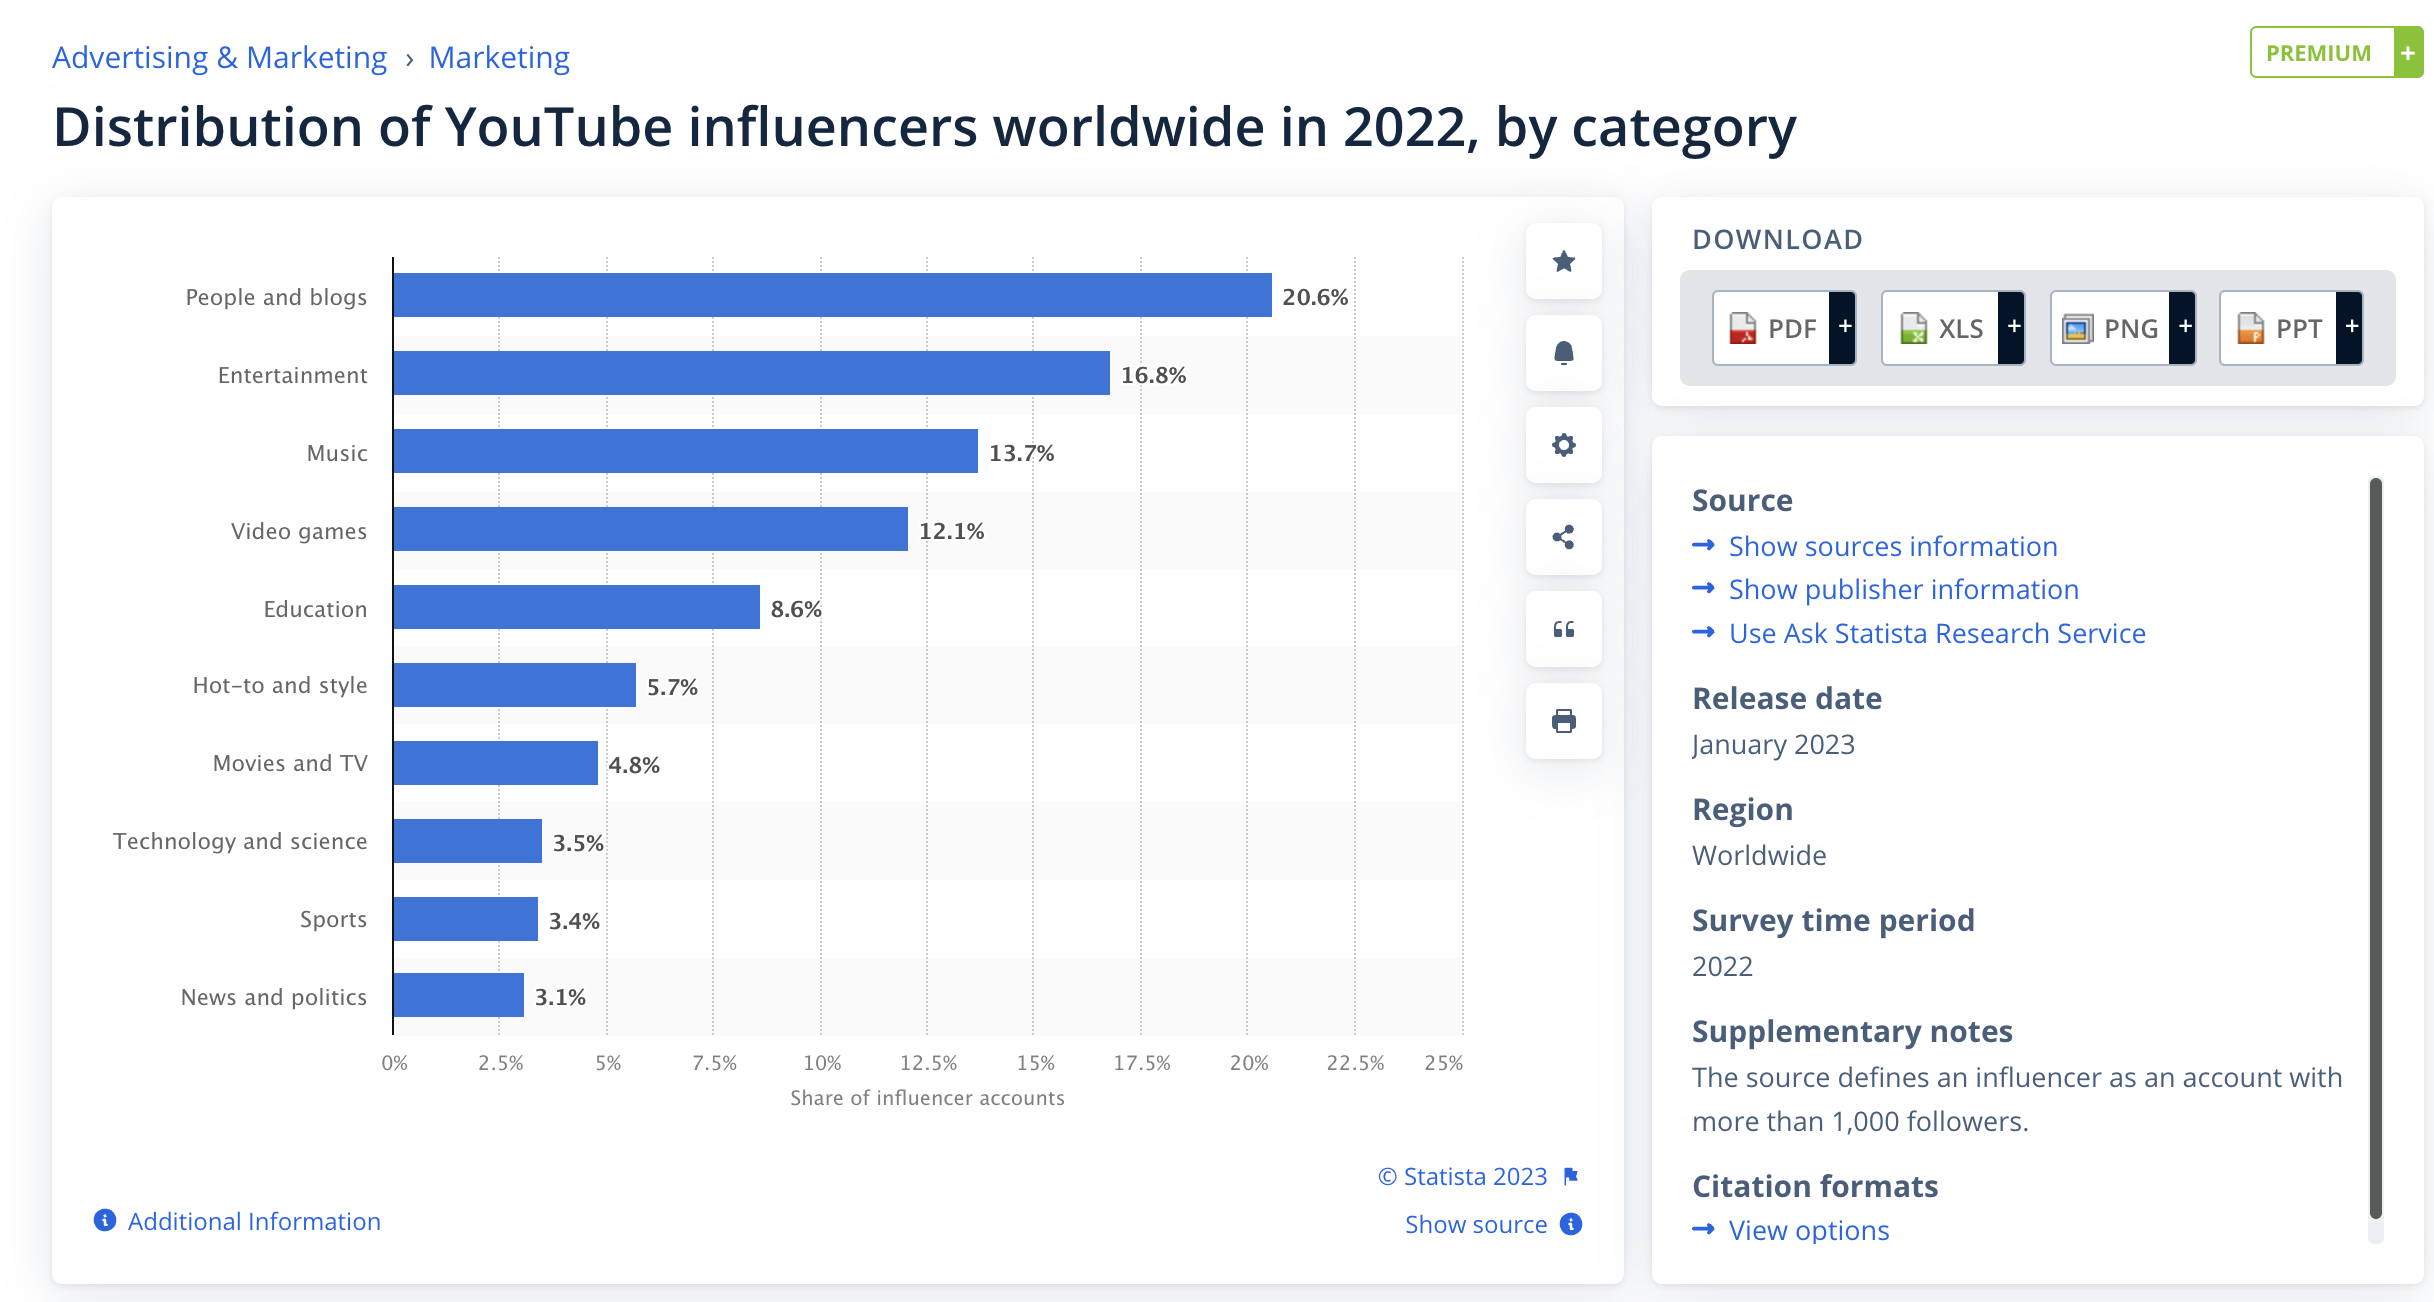 Screenshot from Statista showing the distribution of YouTube influencers worldwide in 2022